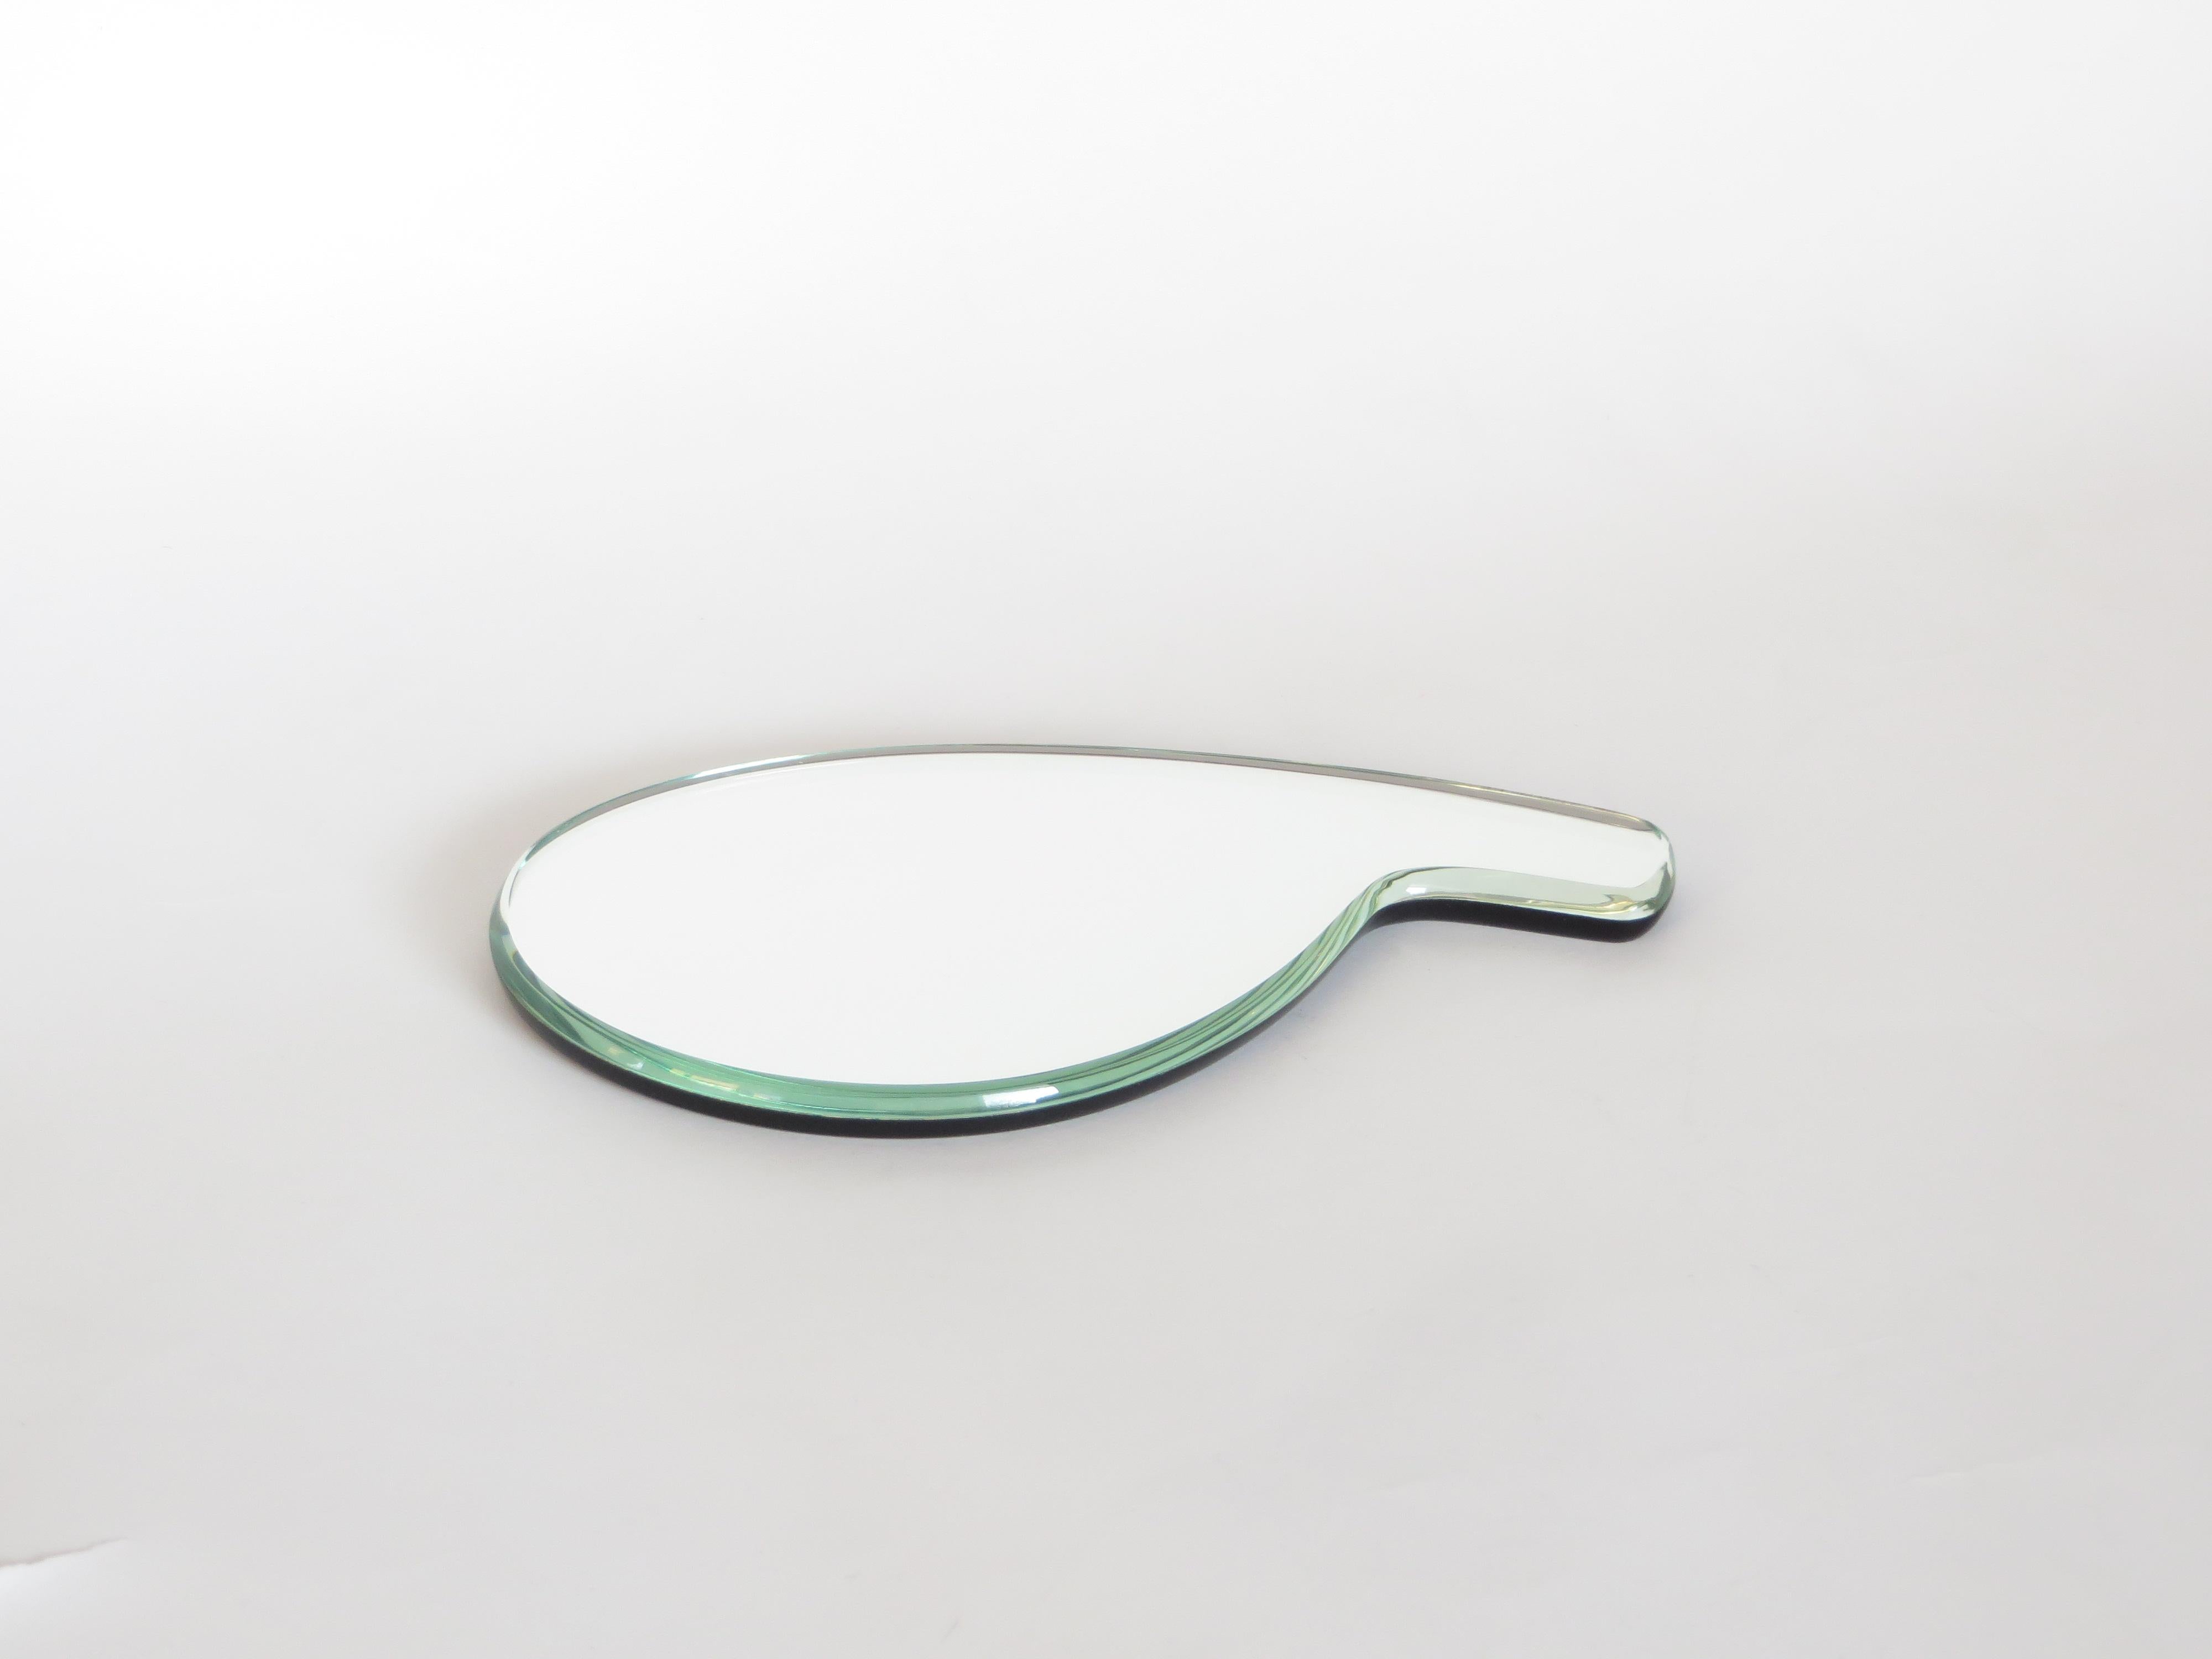 A hand mirror designed by Gio Ponti for Fontana Arte with beveled glass edges and black glass backing.
Designed in 1932, this example most likely produced in the 1990s. Perfect condition, no chips, no scratches.
Literature: Laura Falconi, Fontana